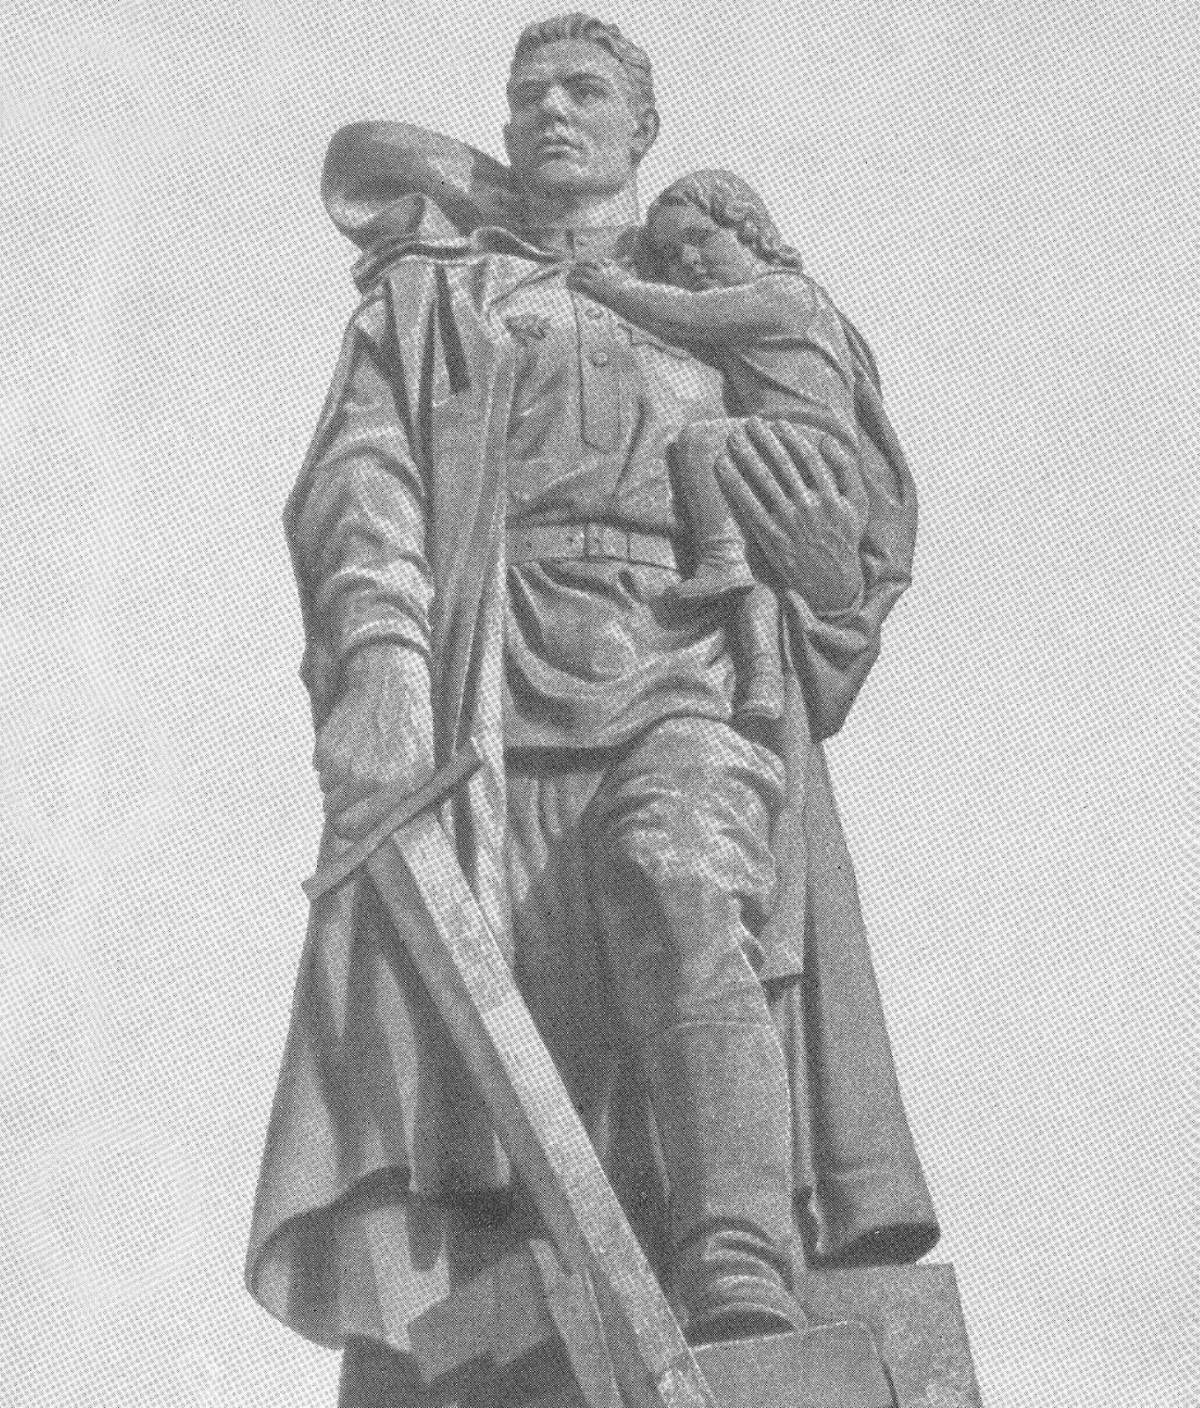 Solitary coloring of a soldier with a child